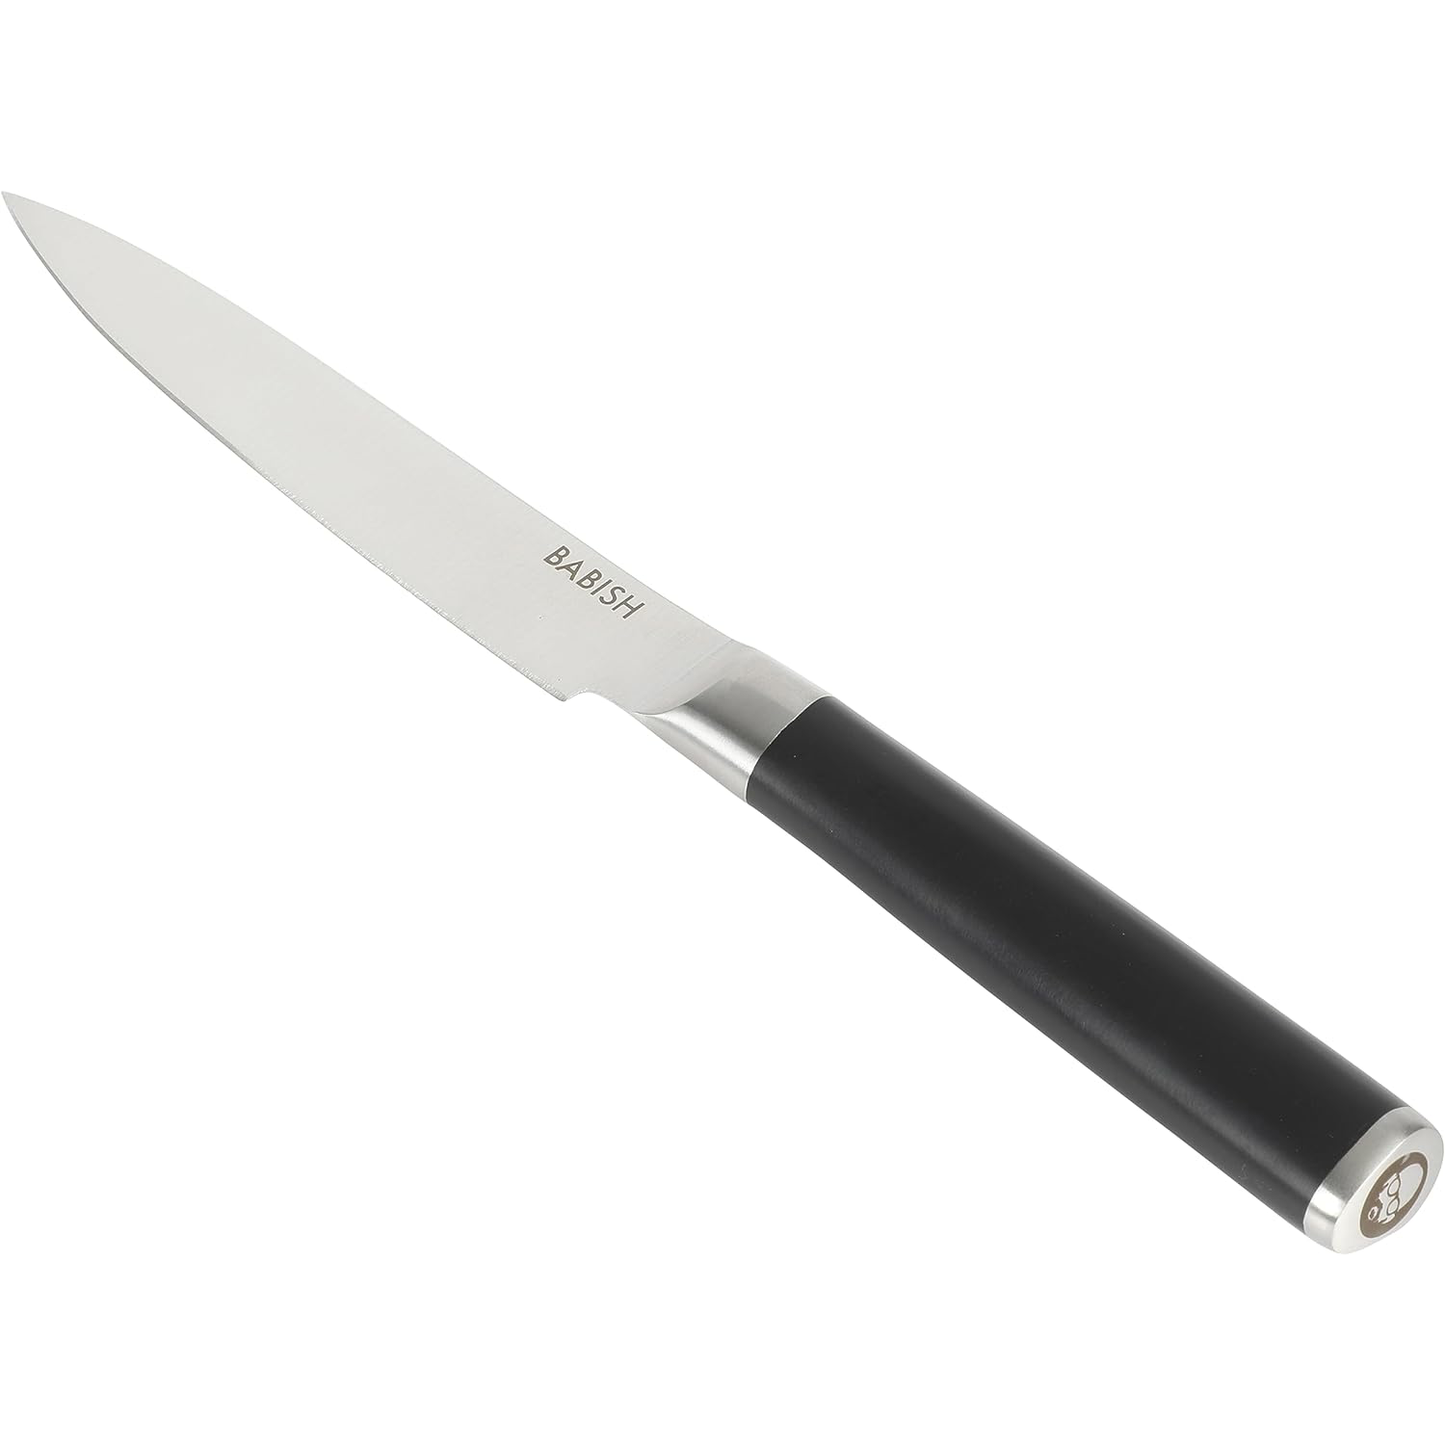 KD 5" Forged Utility Kitchen Knife German Stainless Steel